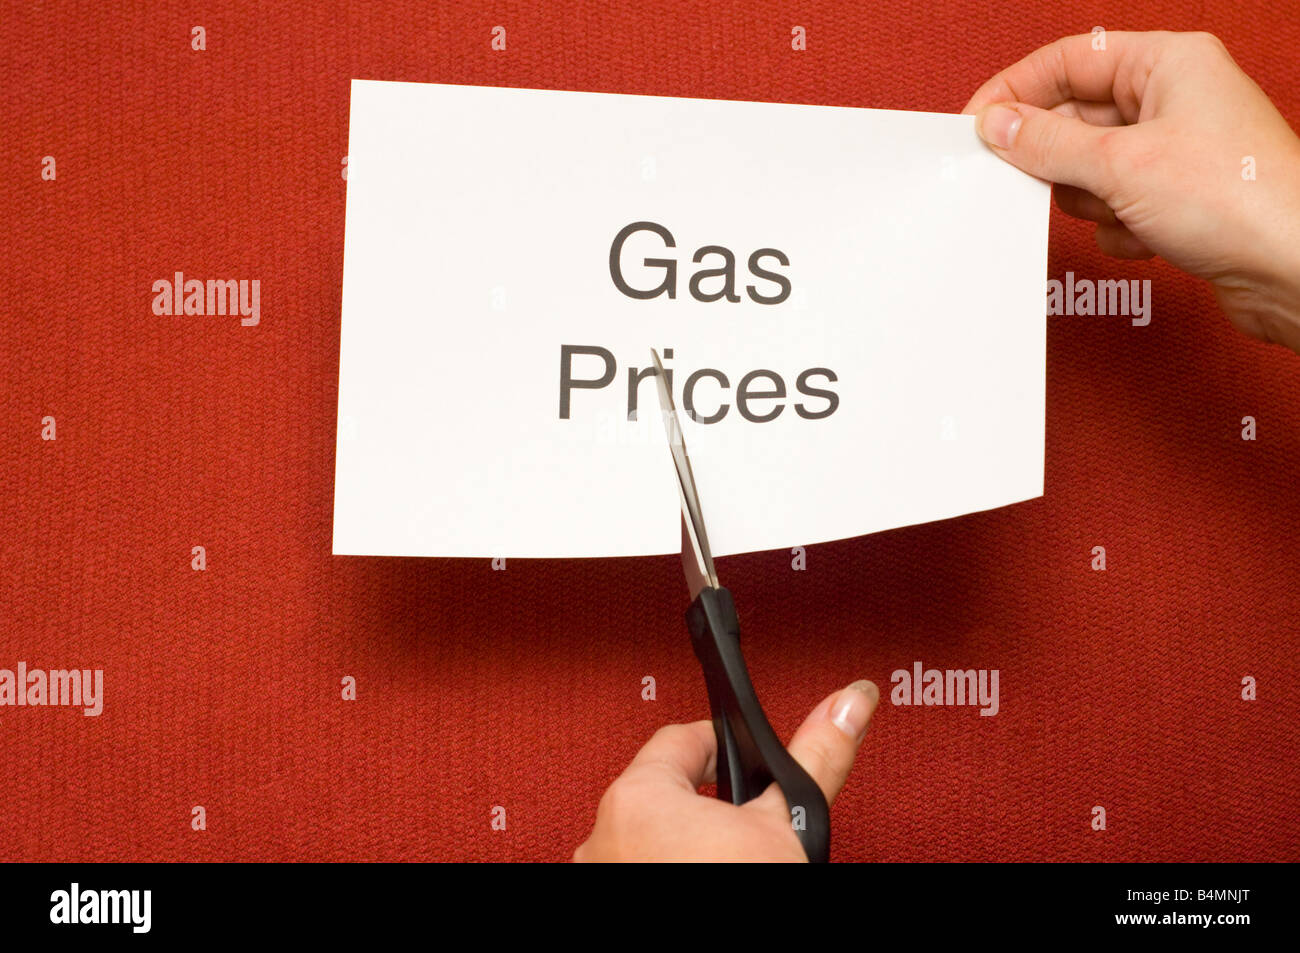 Picture of person cutting a piece of paper with 'Gas prices' written on it using a pair of scissors Stock Photo